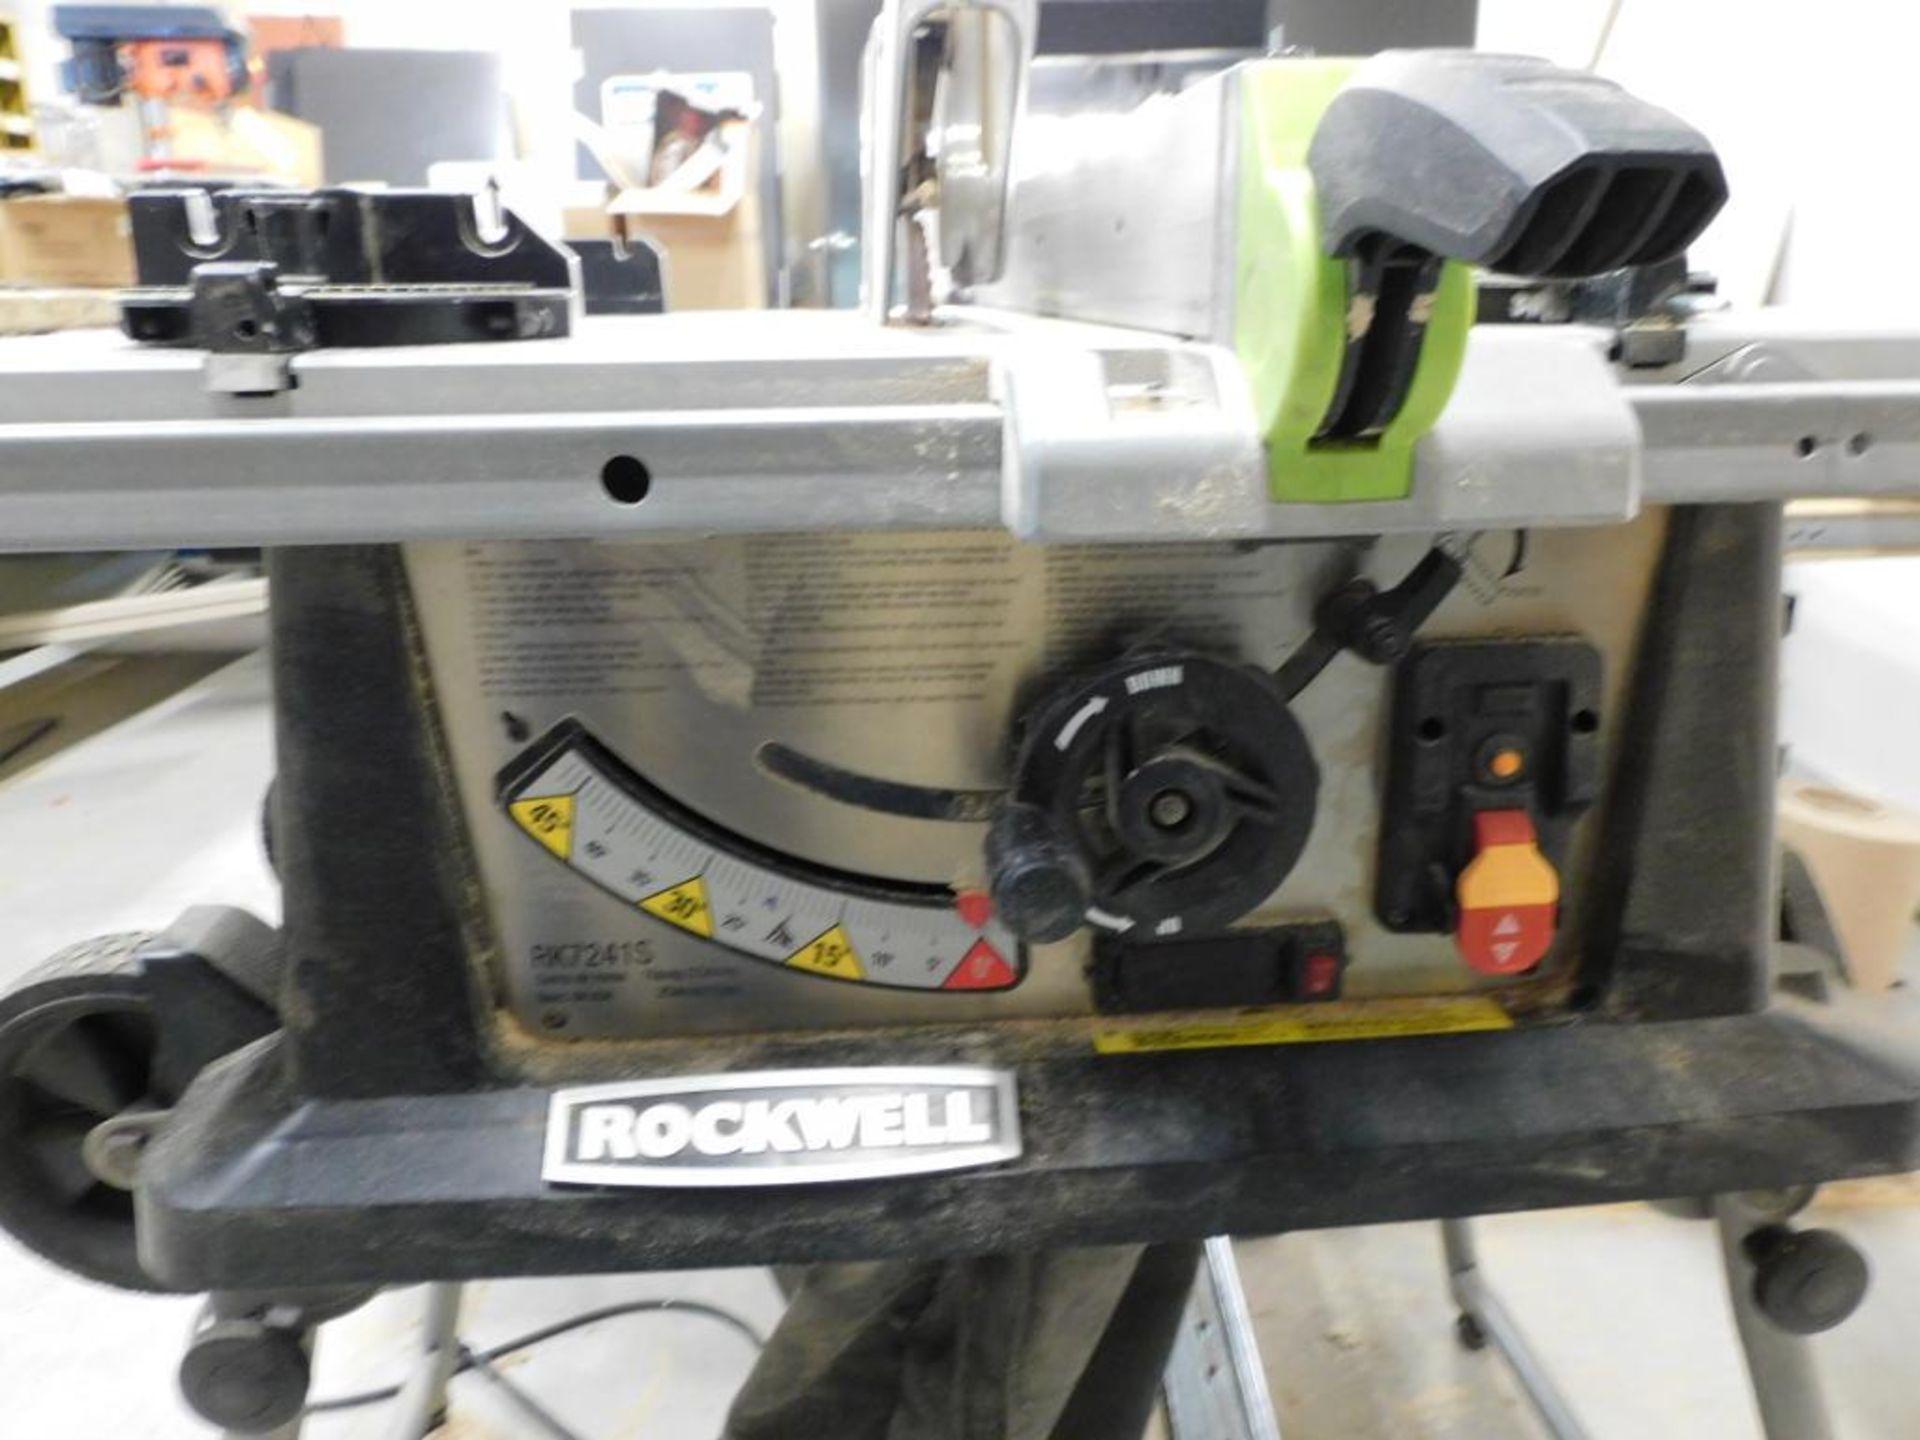 Rockwell RK7241S Table Saw, with Laser Guide - Image 3 of 4